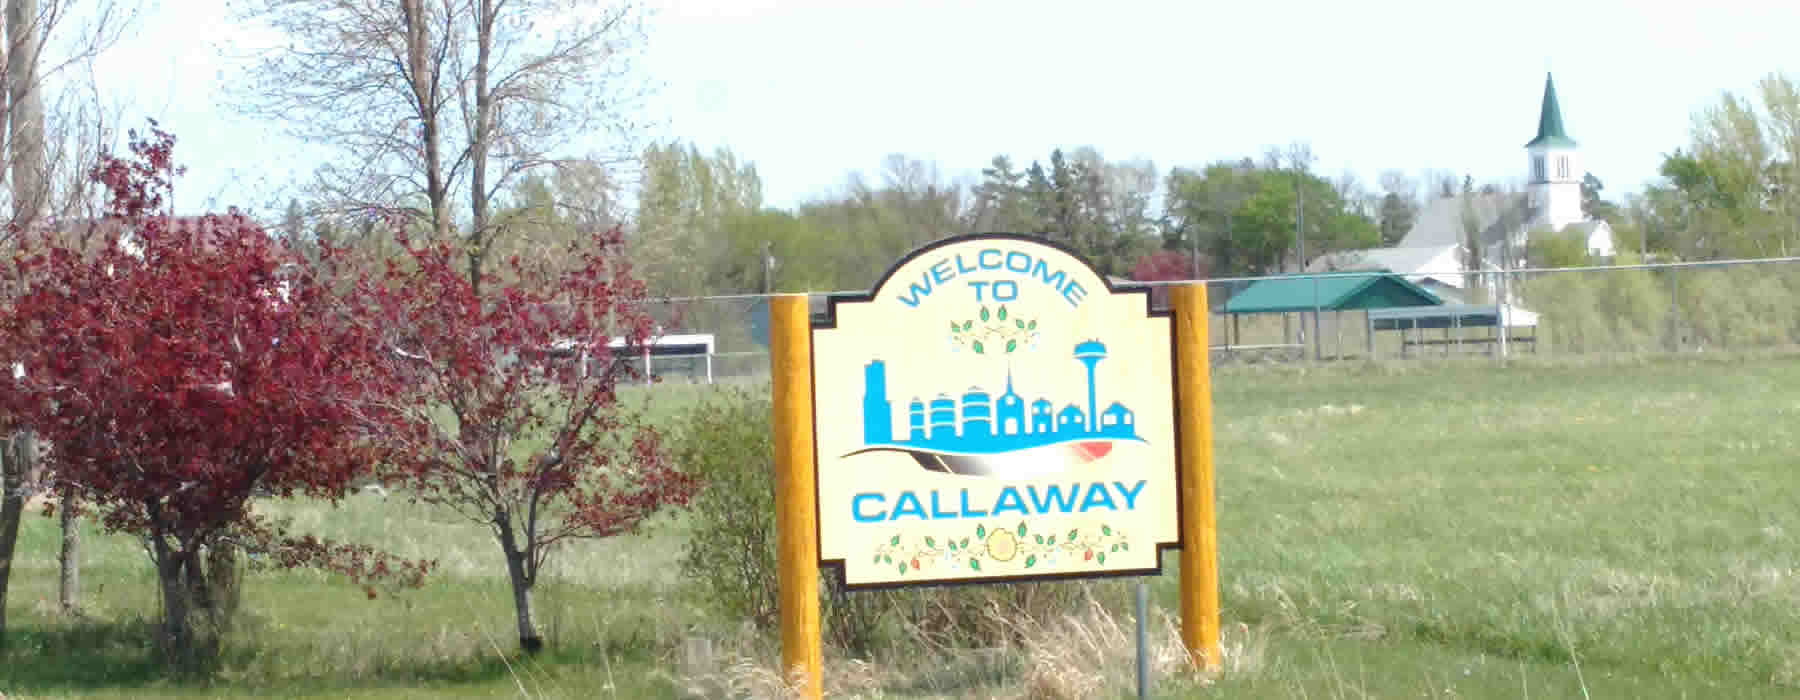 Find out about the city leadership of the City of Callaway, Minnesota.